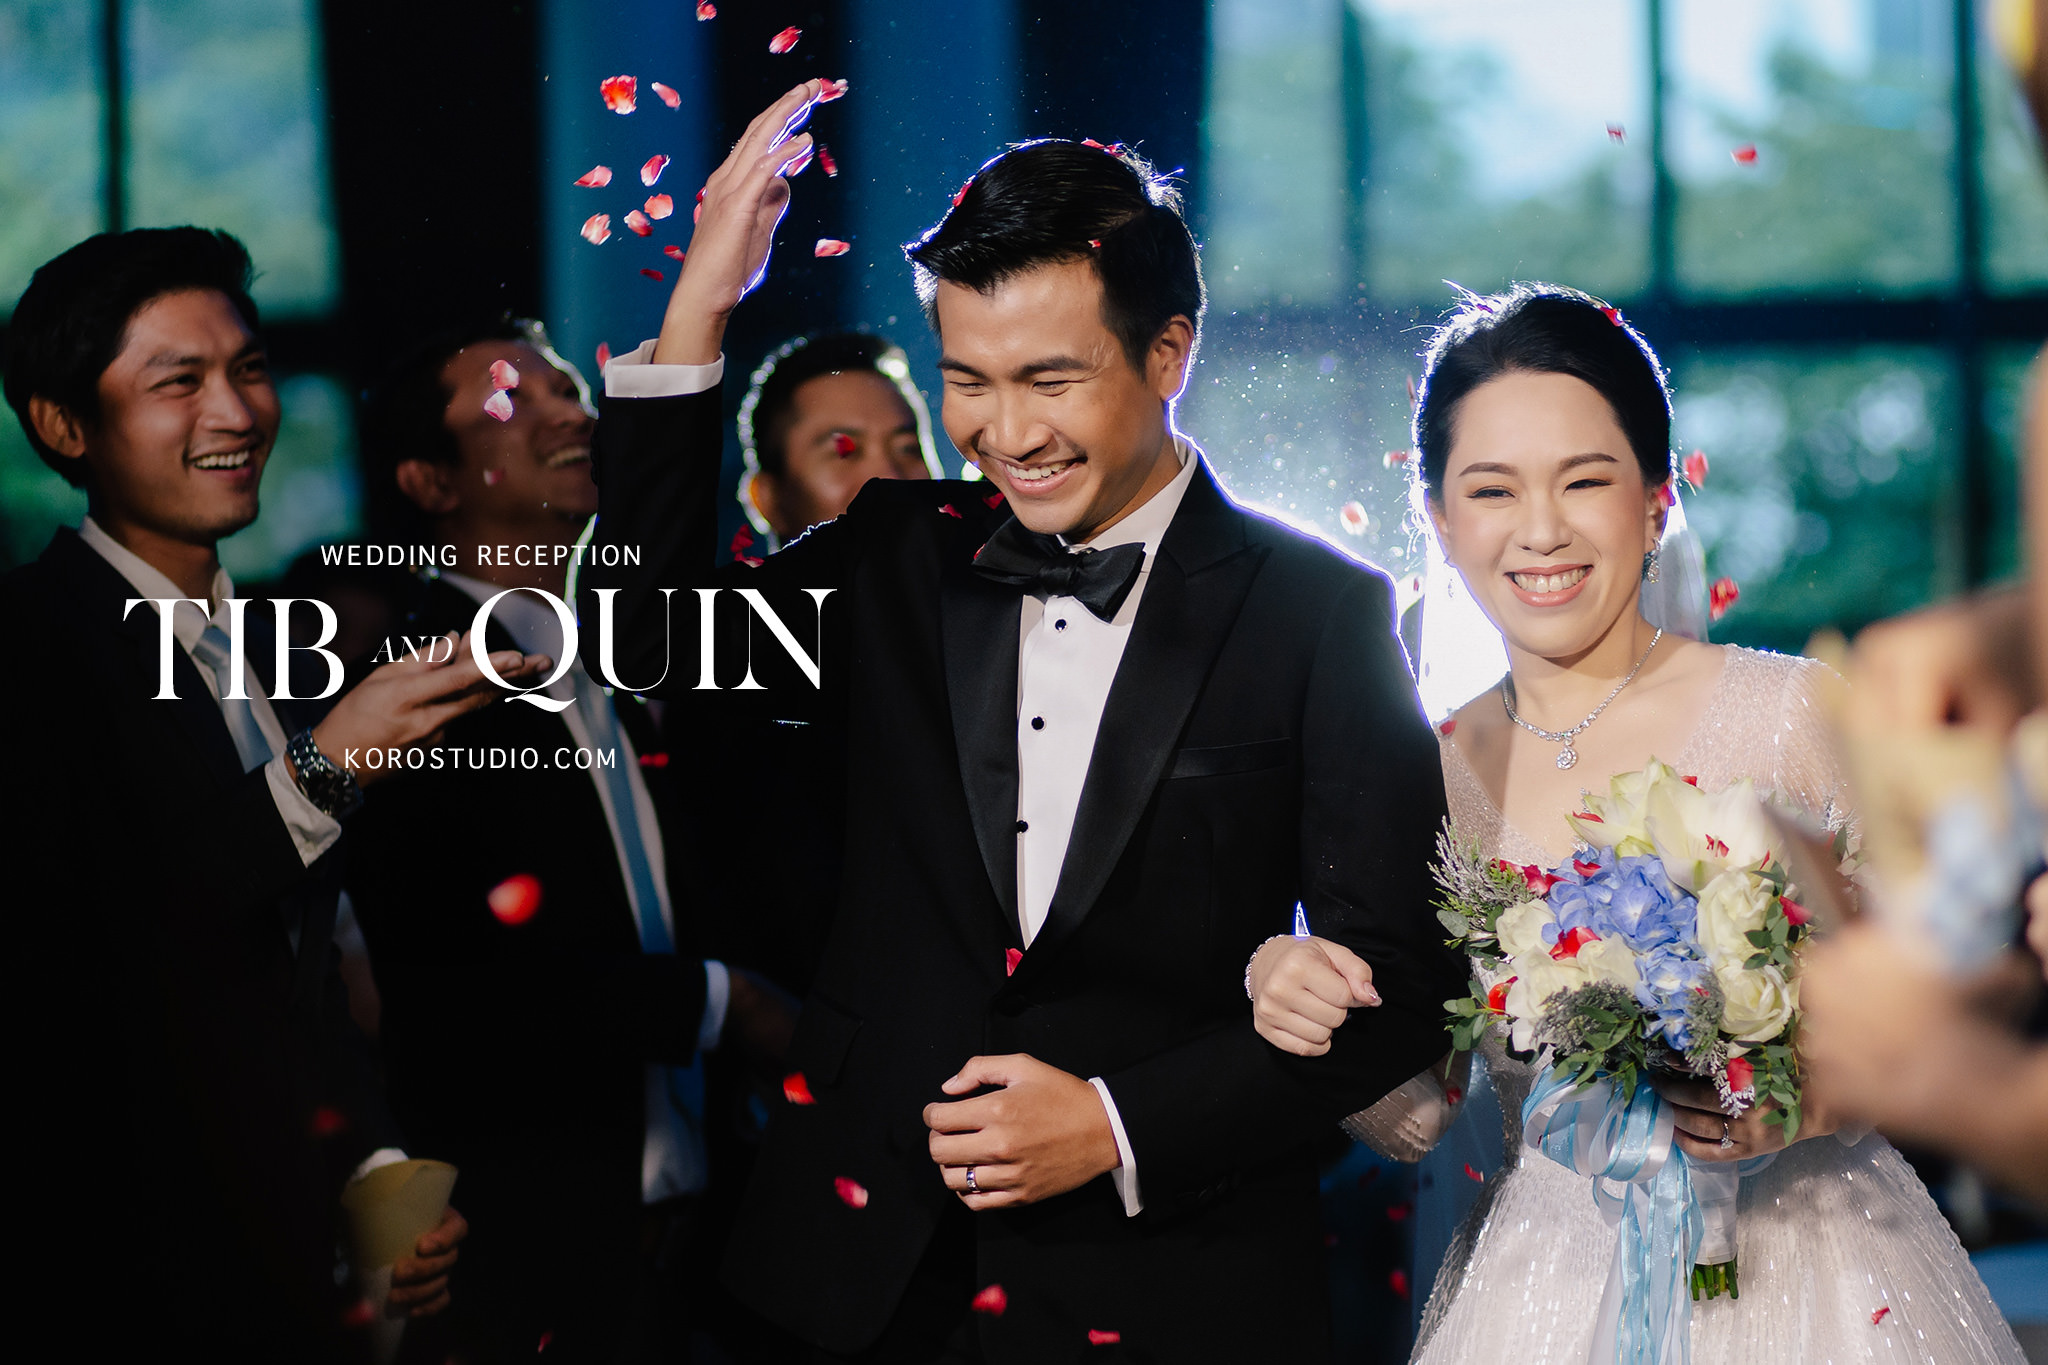 the athenee hotel wedding reception cover The Athenee Hotel Bangkok Wedding Reception Tib and Quin